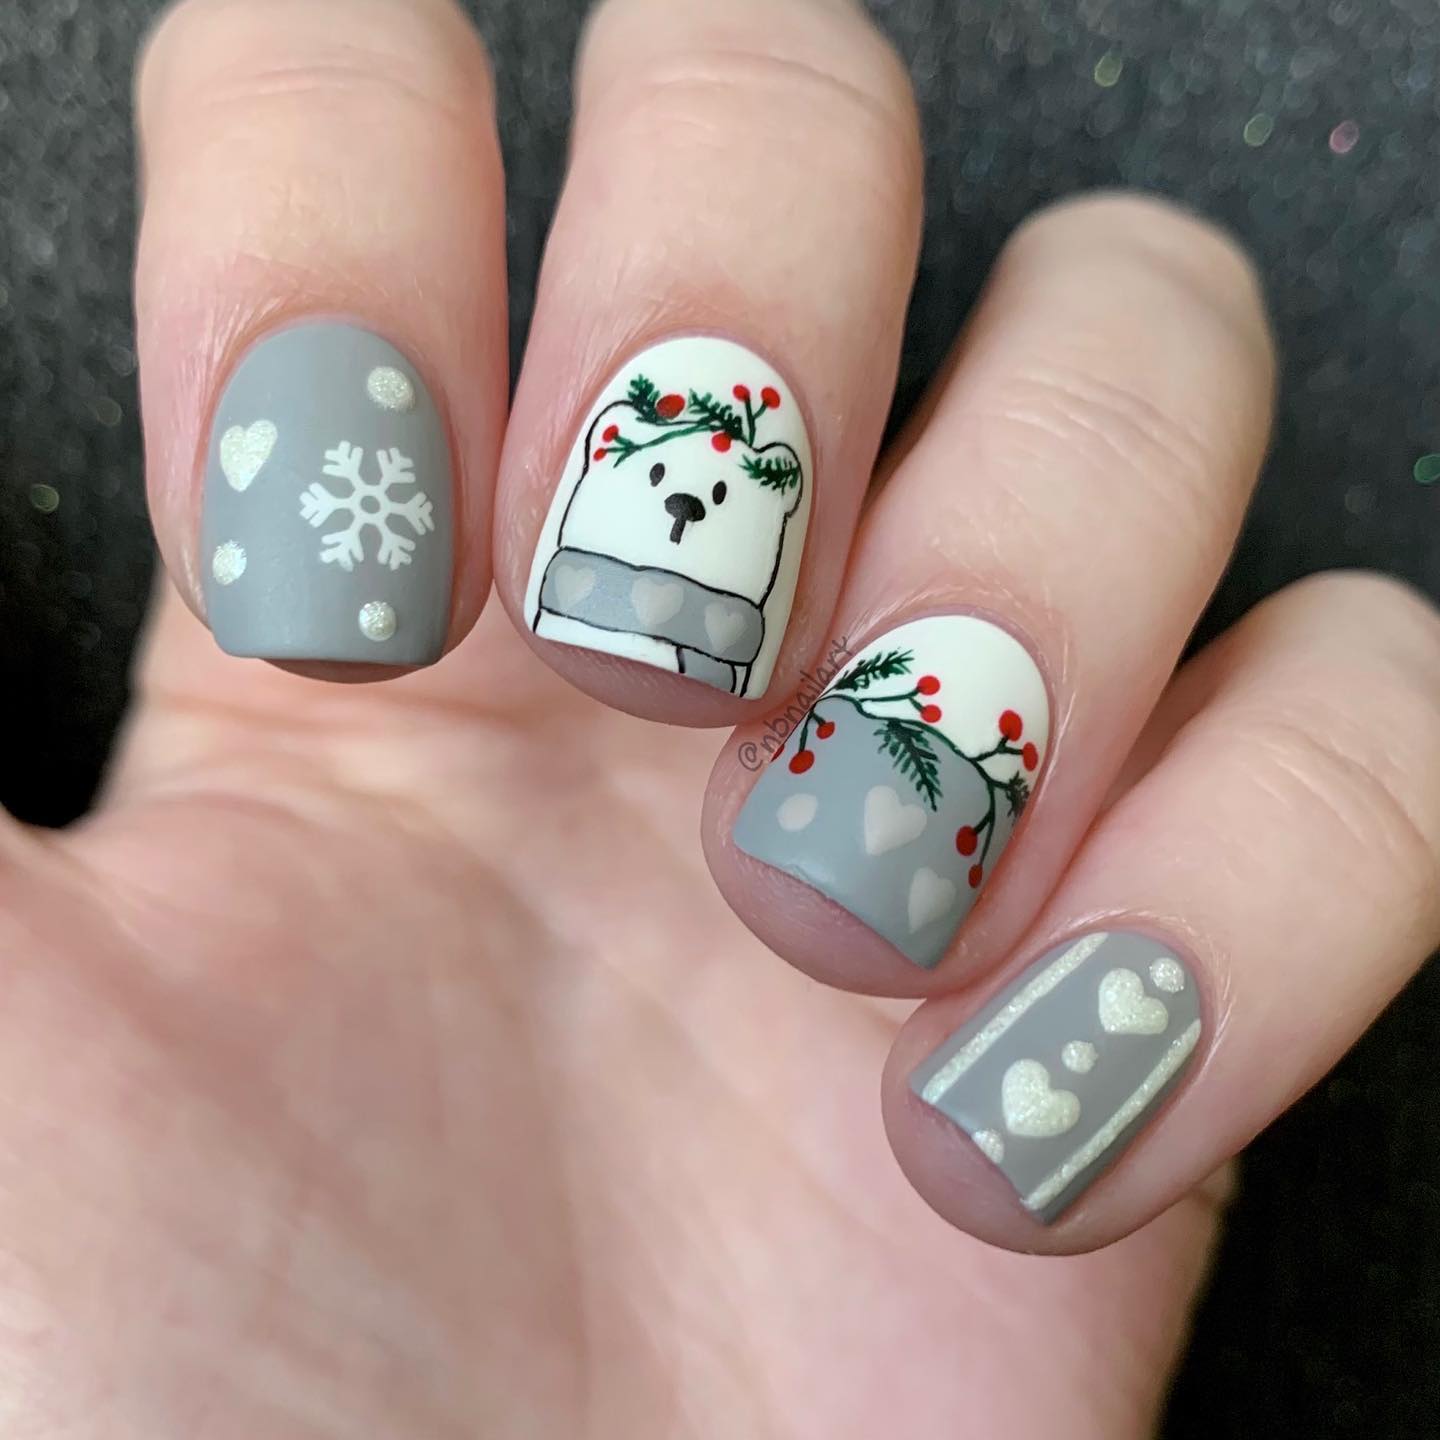 A polar bear with winter fruit tree braches on top of its head, snowflakes and shiny hearts will take your nails to a whole new level.